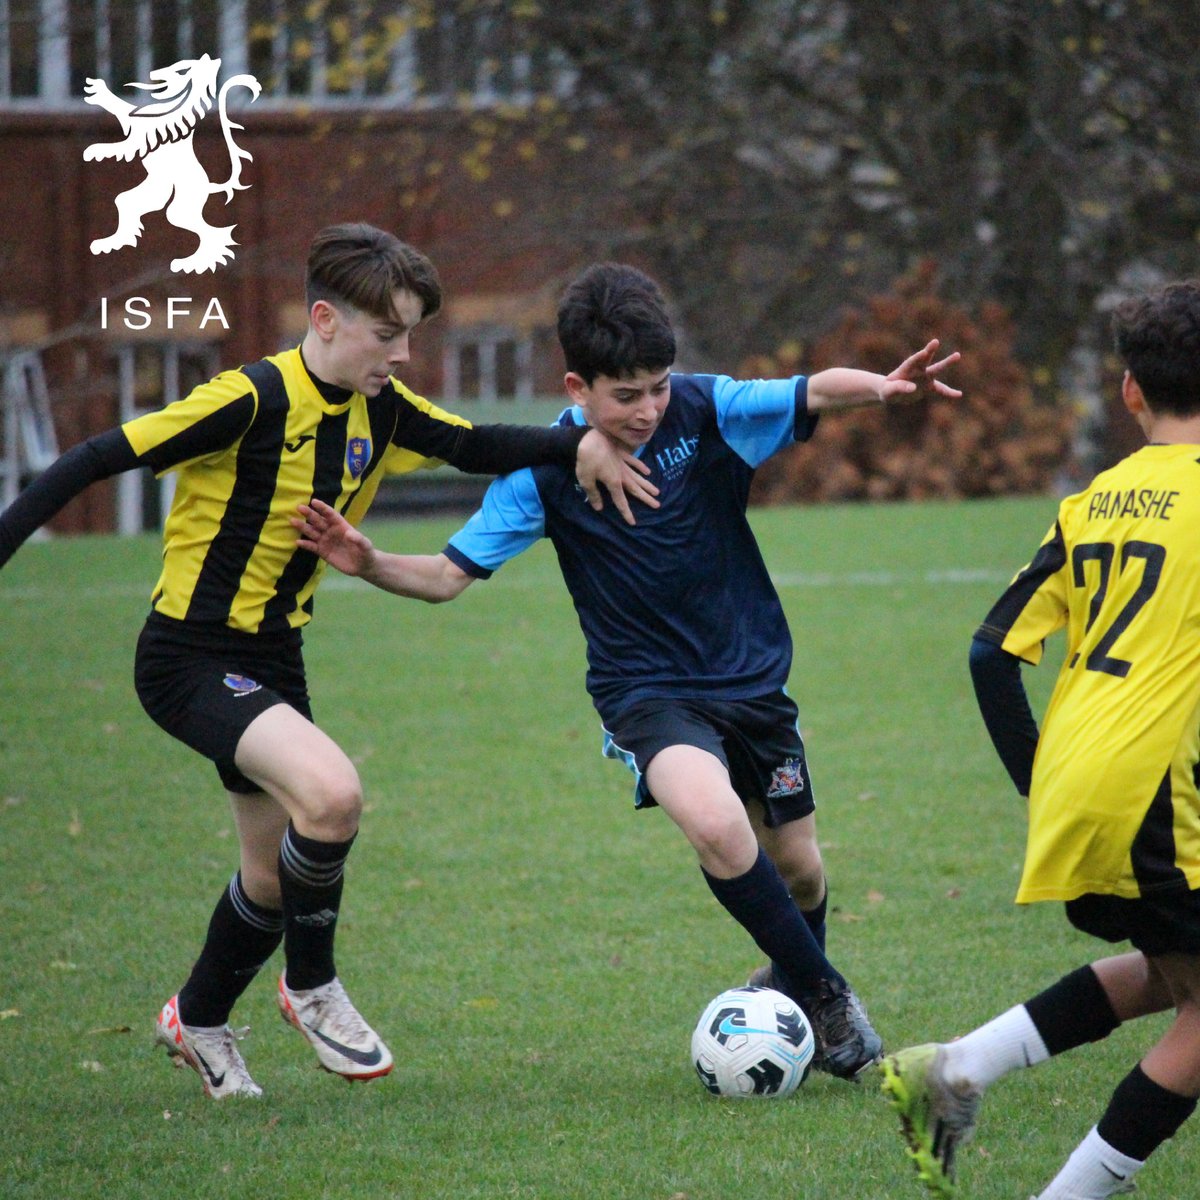 Congrats to Max (8M2) and Zach (8S1) for their outstanding performance, securing spots on the England National Football ISFA U14 team! ⚽️ Click the link to learn more: tinyurl.com/U14Football #Schoolsfootball #ISFA #Ambition @isfafootball @spursofficial